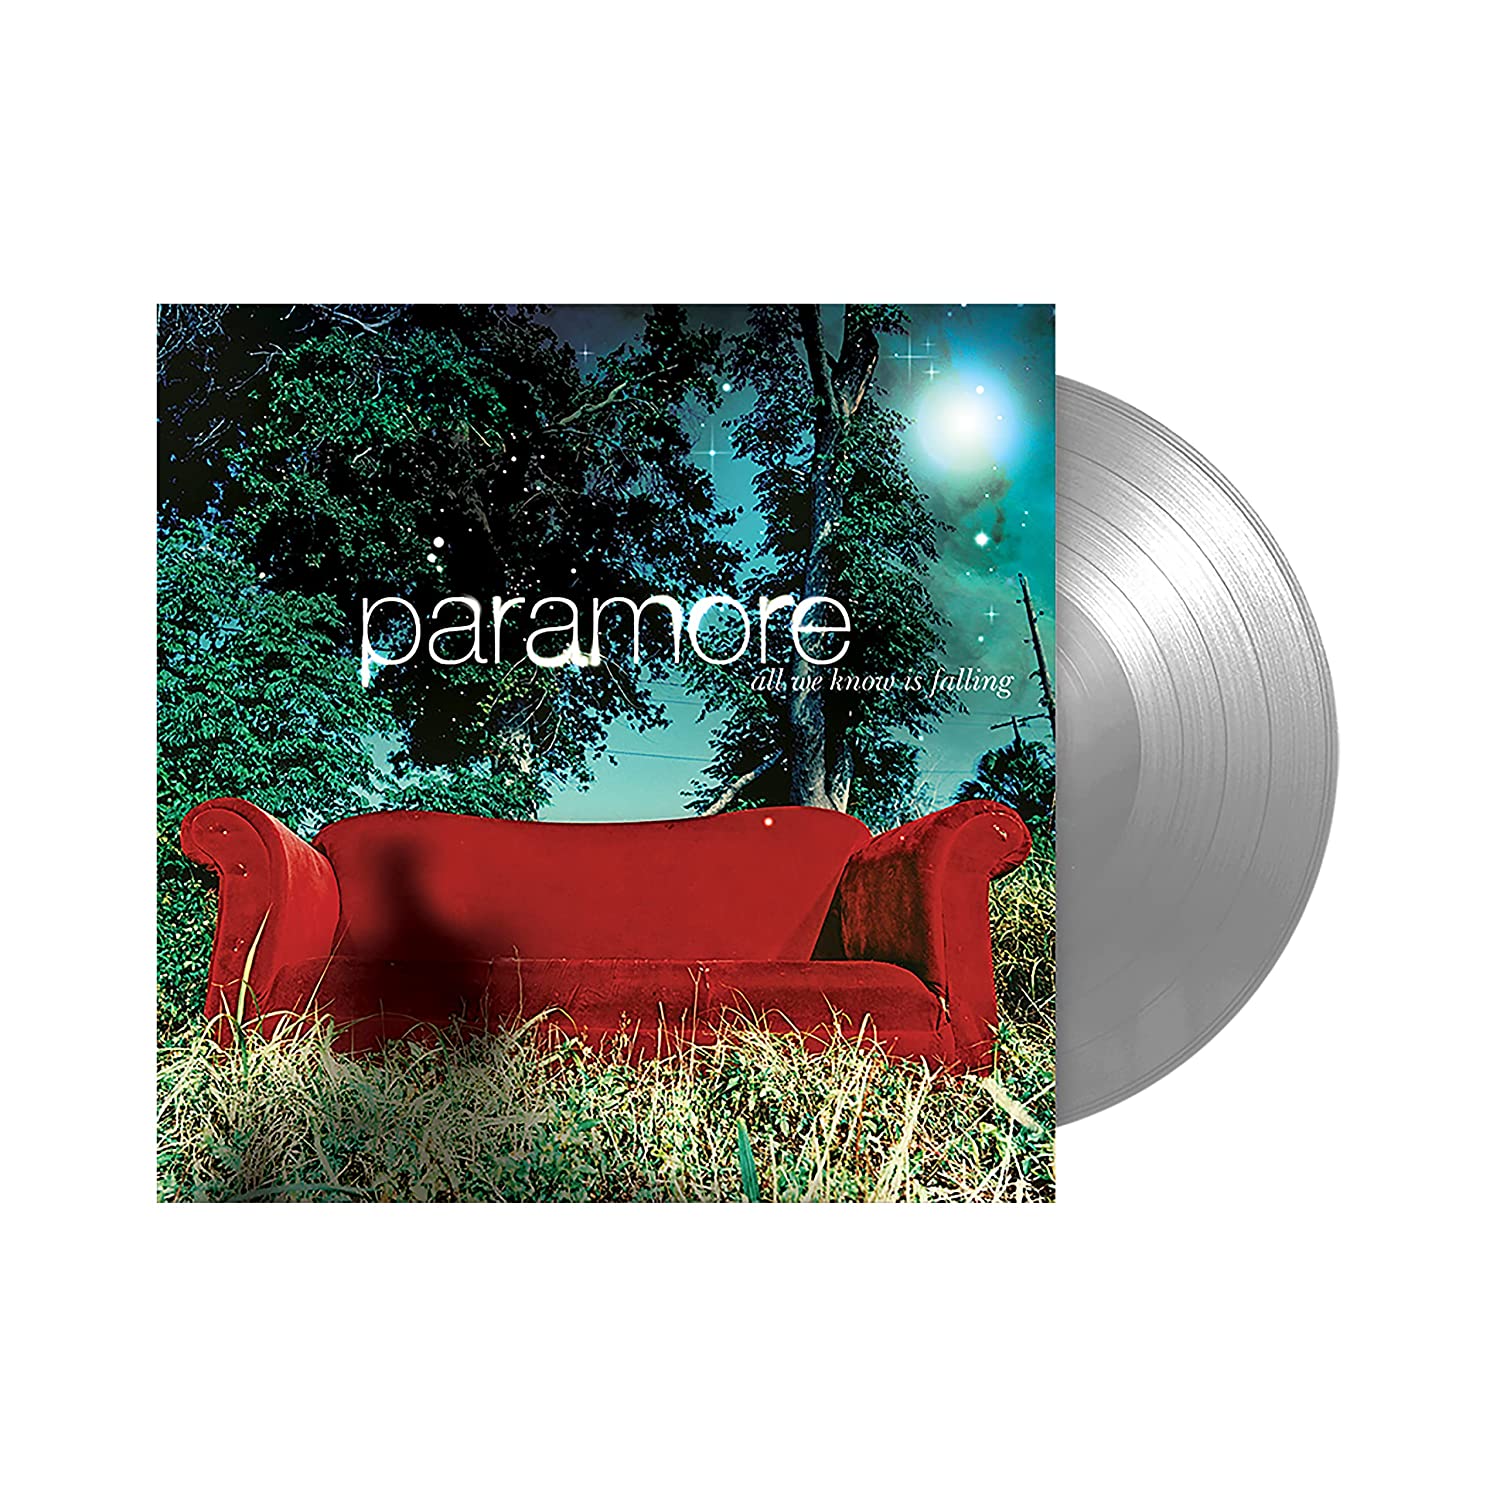 Paramore (파라모어) - 1집 All We Know Is Falling [실버 컬러 LP] 